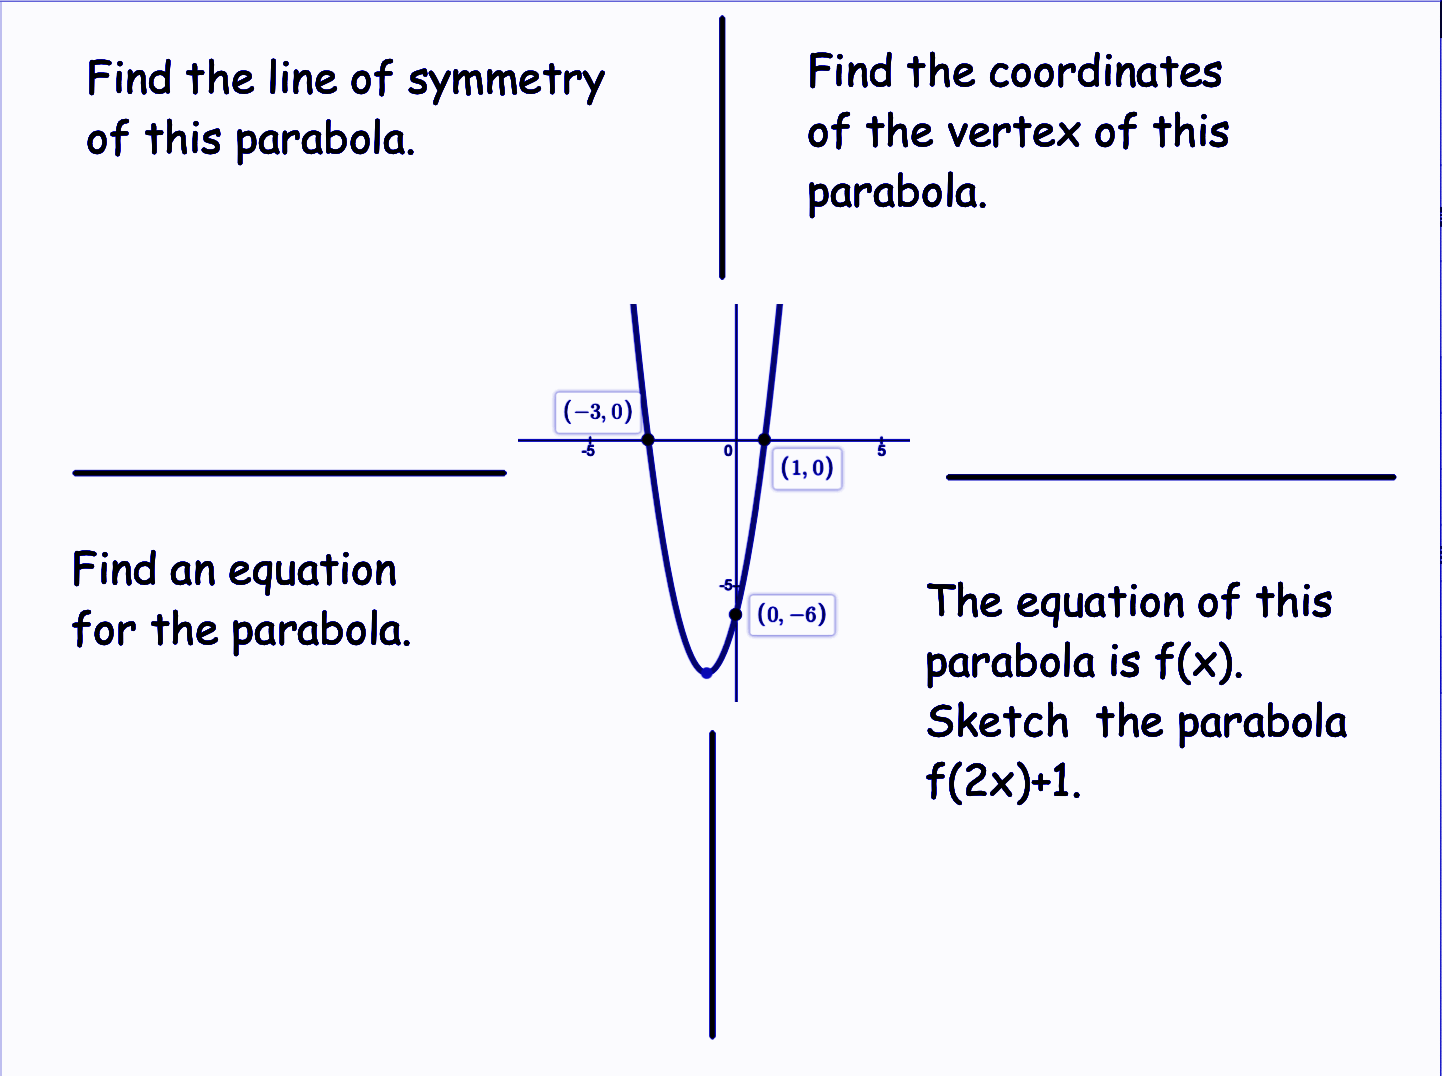 Figure 6 shows a graph with a parabola and four instructions for students. The instructions are: "Find the line of symmetry of this parabola.", "Find the coordinates of the vertex of this parabola.", "Find an equation for the parabola.", and "The equation of this parabola is f(x). Sketch the parabola f(2x)+1.".